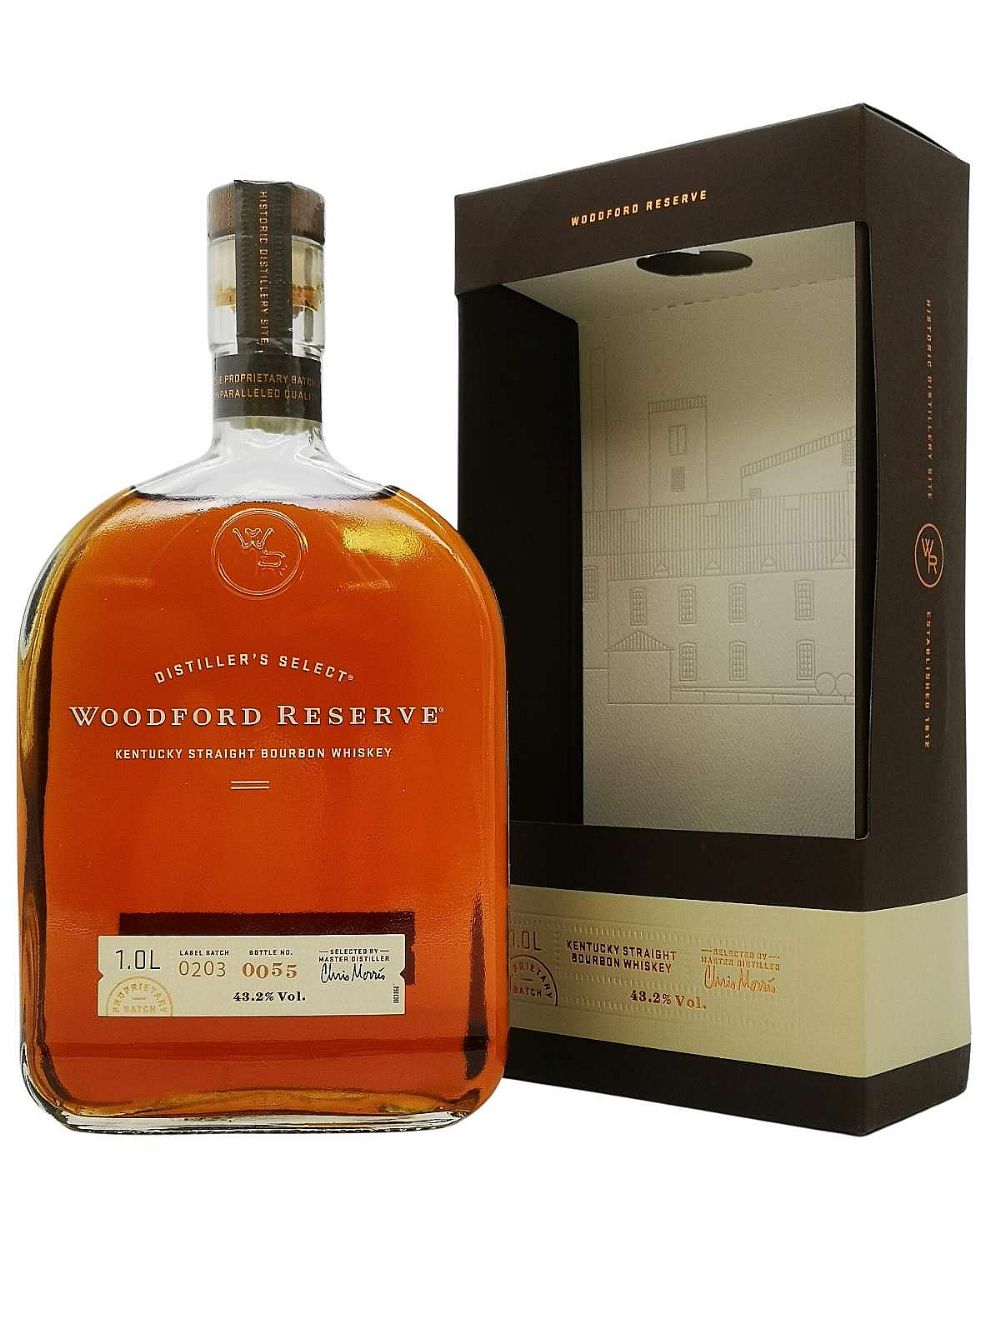 Woodford Reserve Distillers Select Kentucky Straight Bourbon